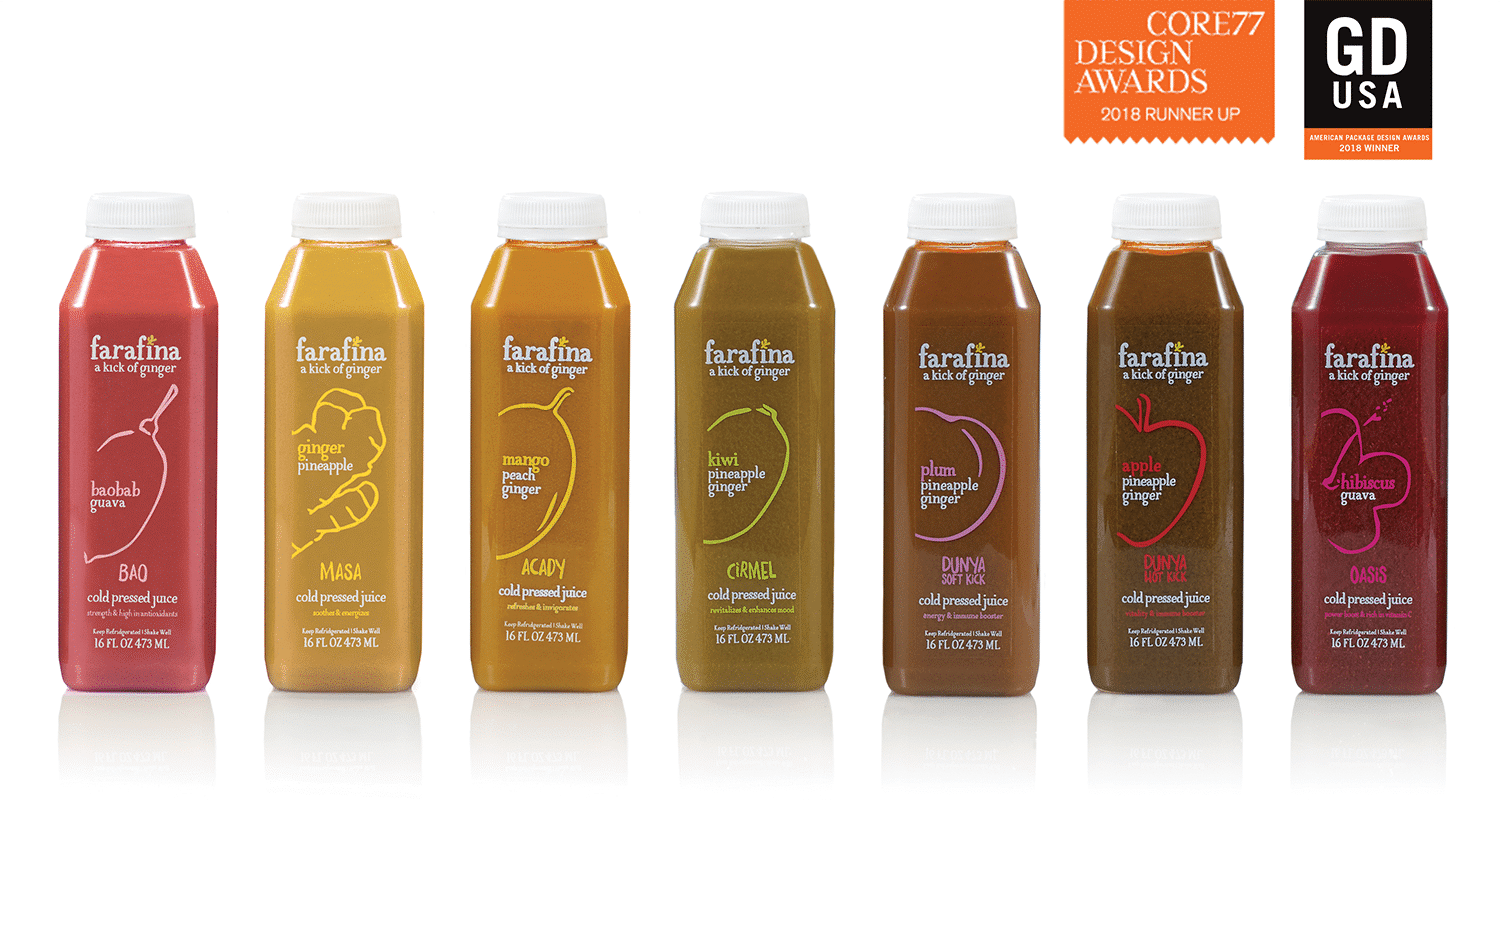 Core 77 Package Design Award for Farafina juices